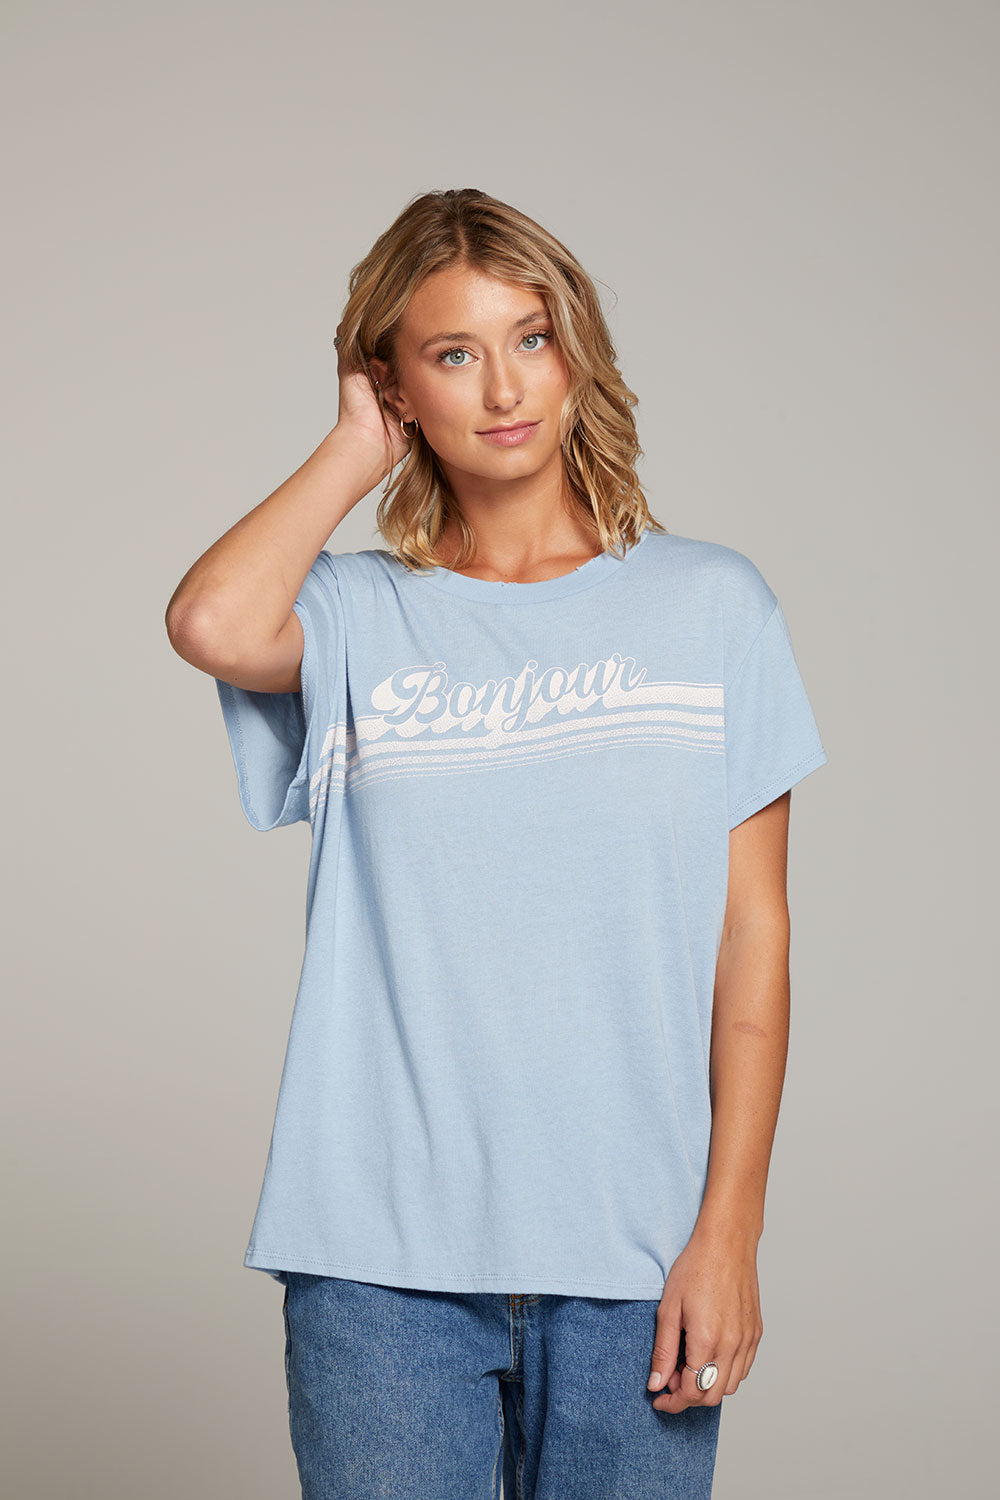 Bonjour Tee WOMENS chaserbrand